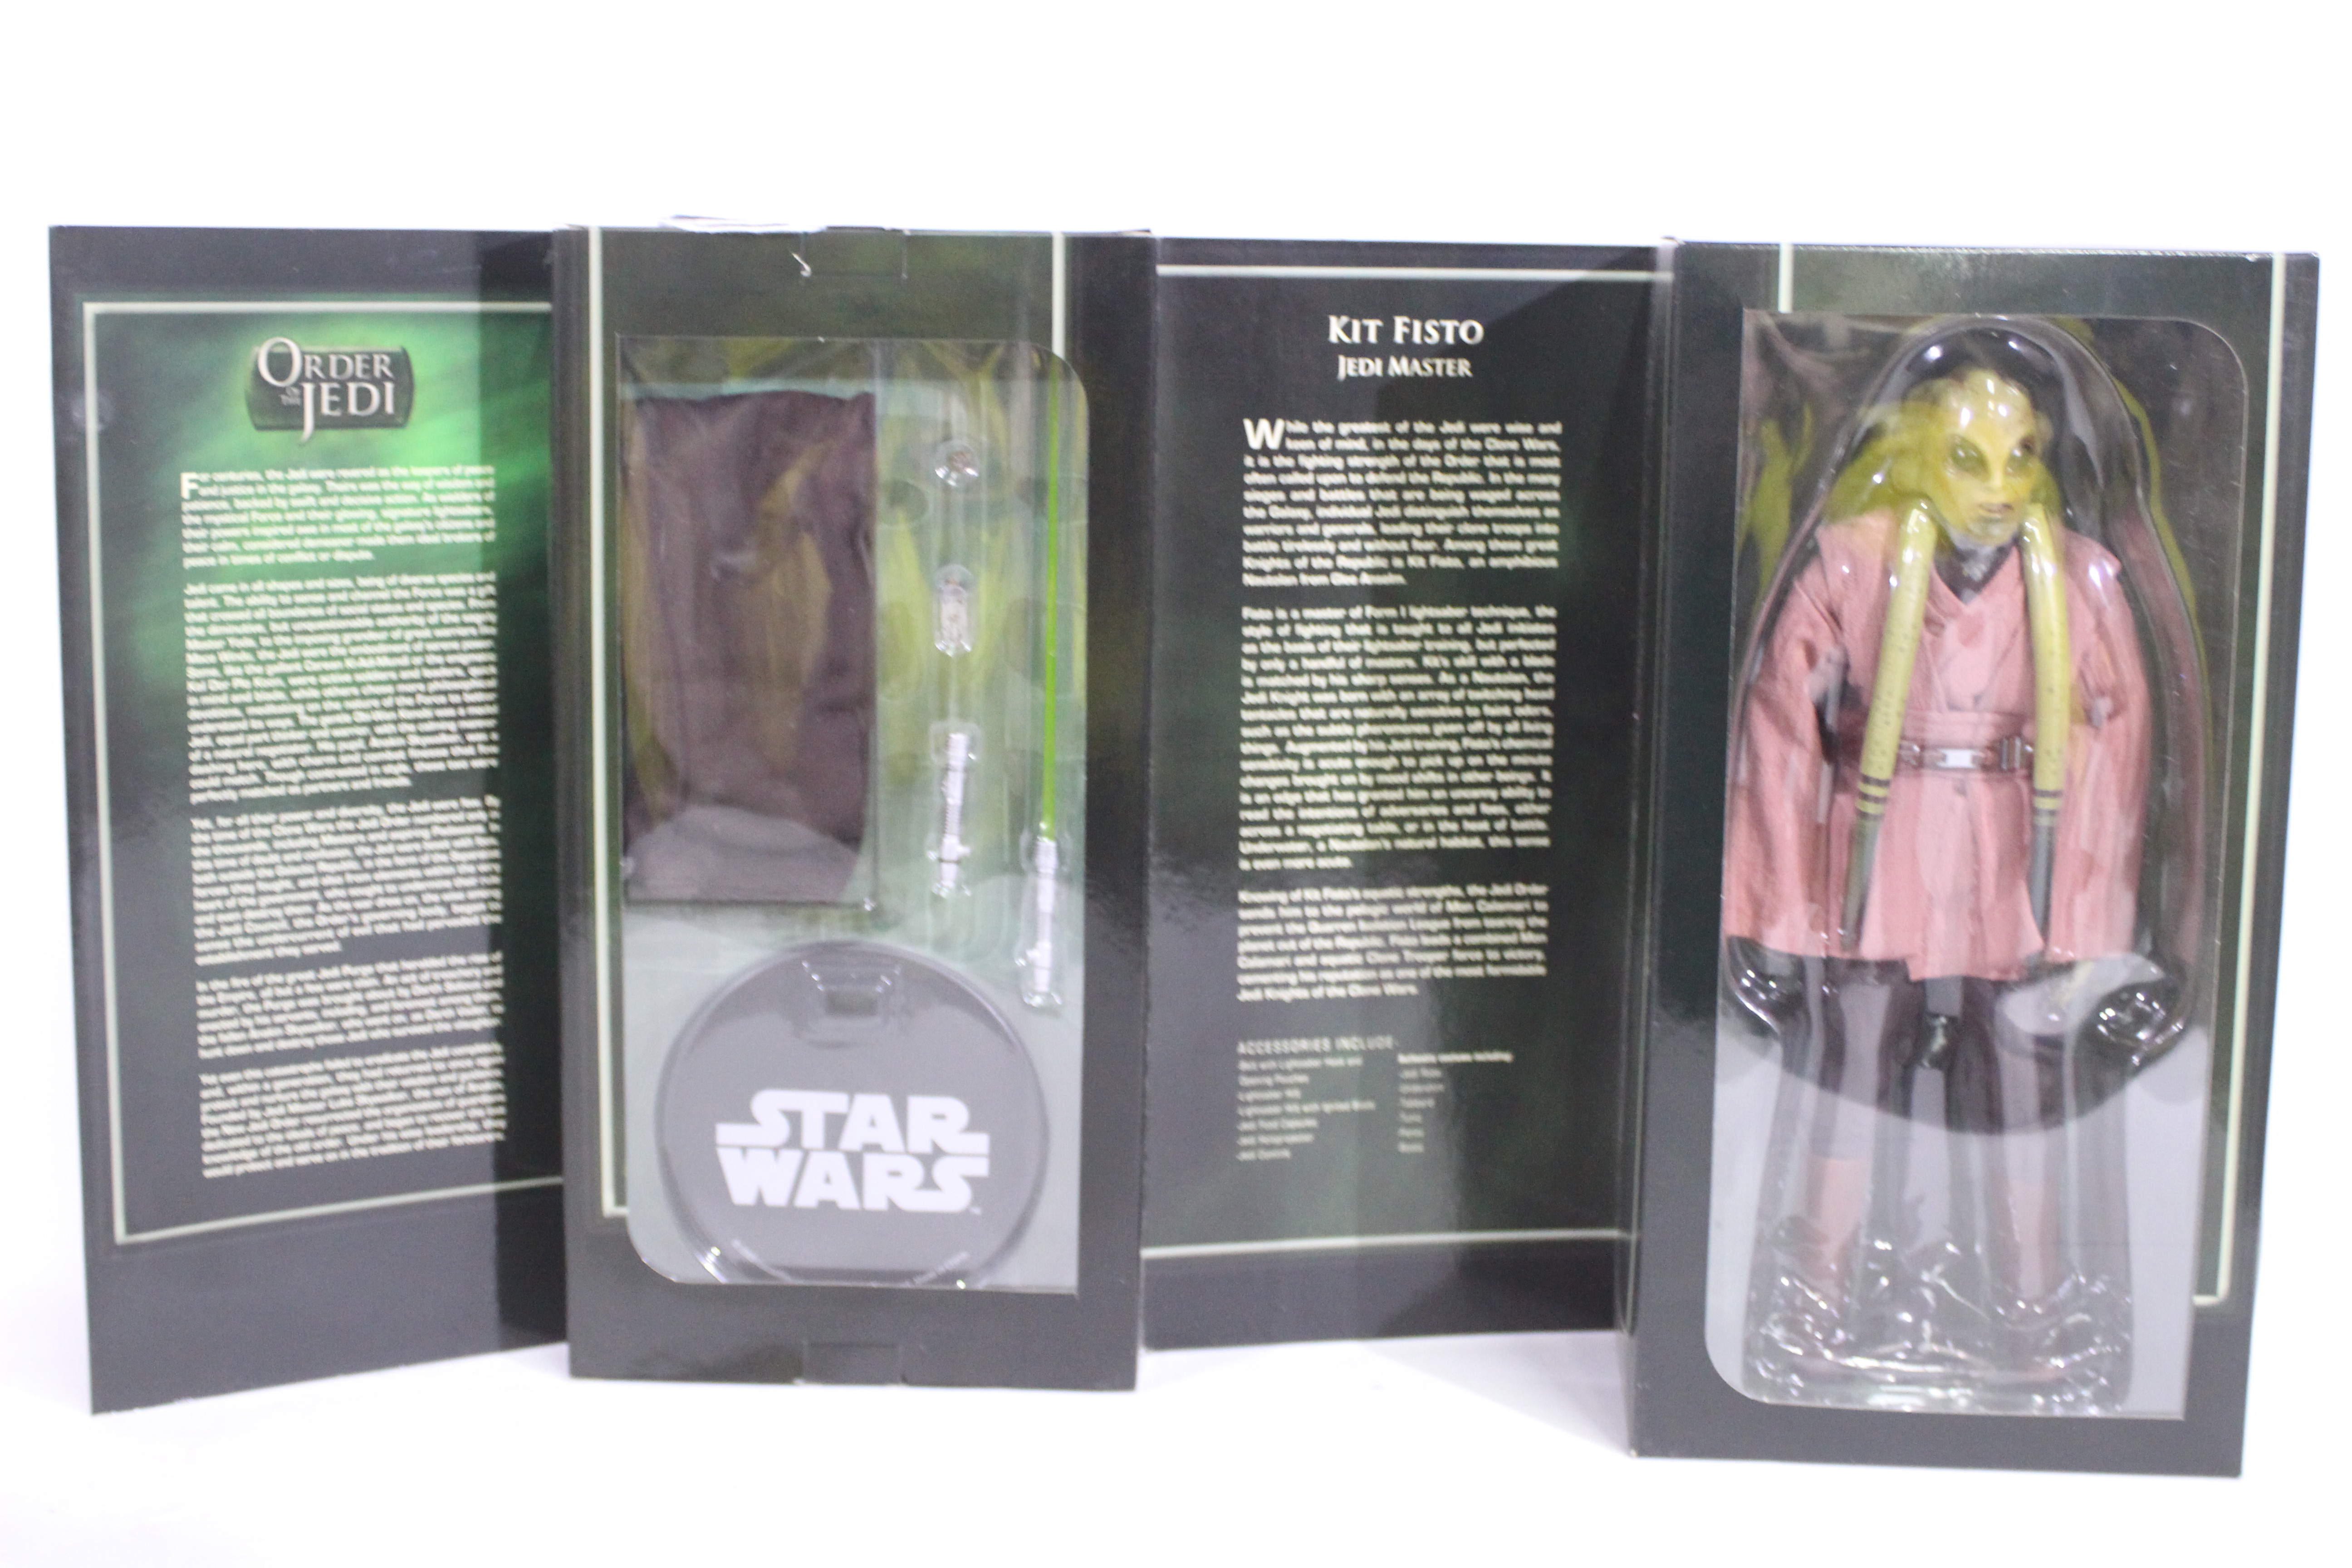 Star Wars - Sideshow Collectibles. - Image 2 of 3